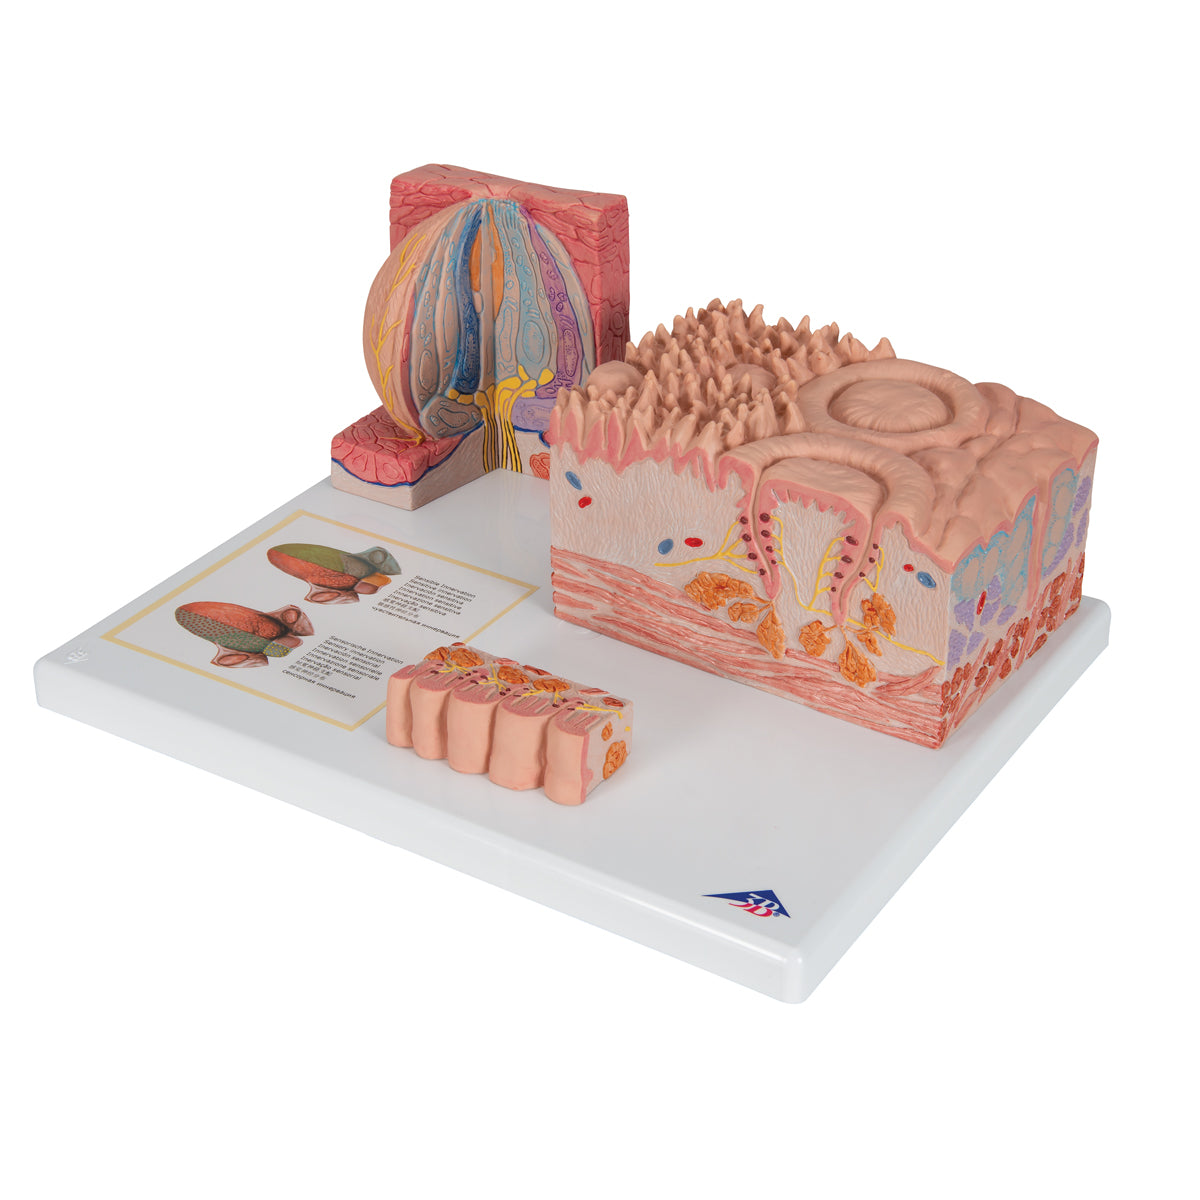 Detailed model of the different tissues of the tongue in a microscopic perspective